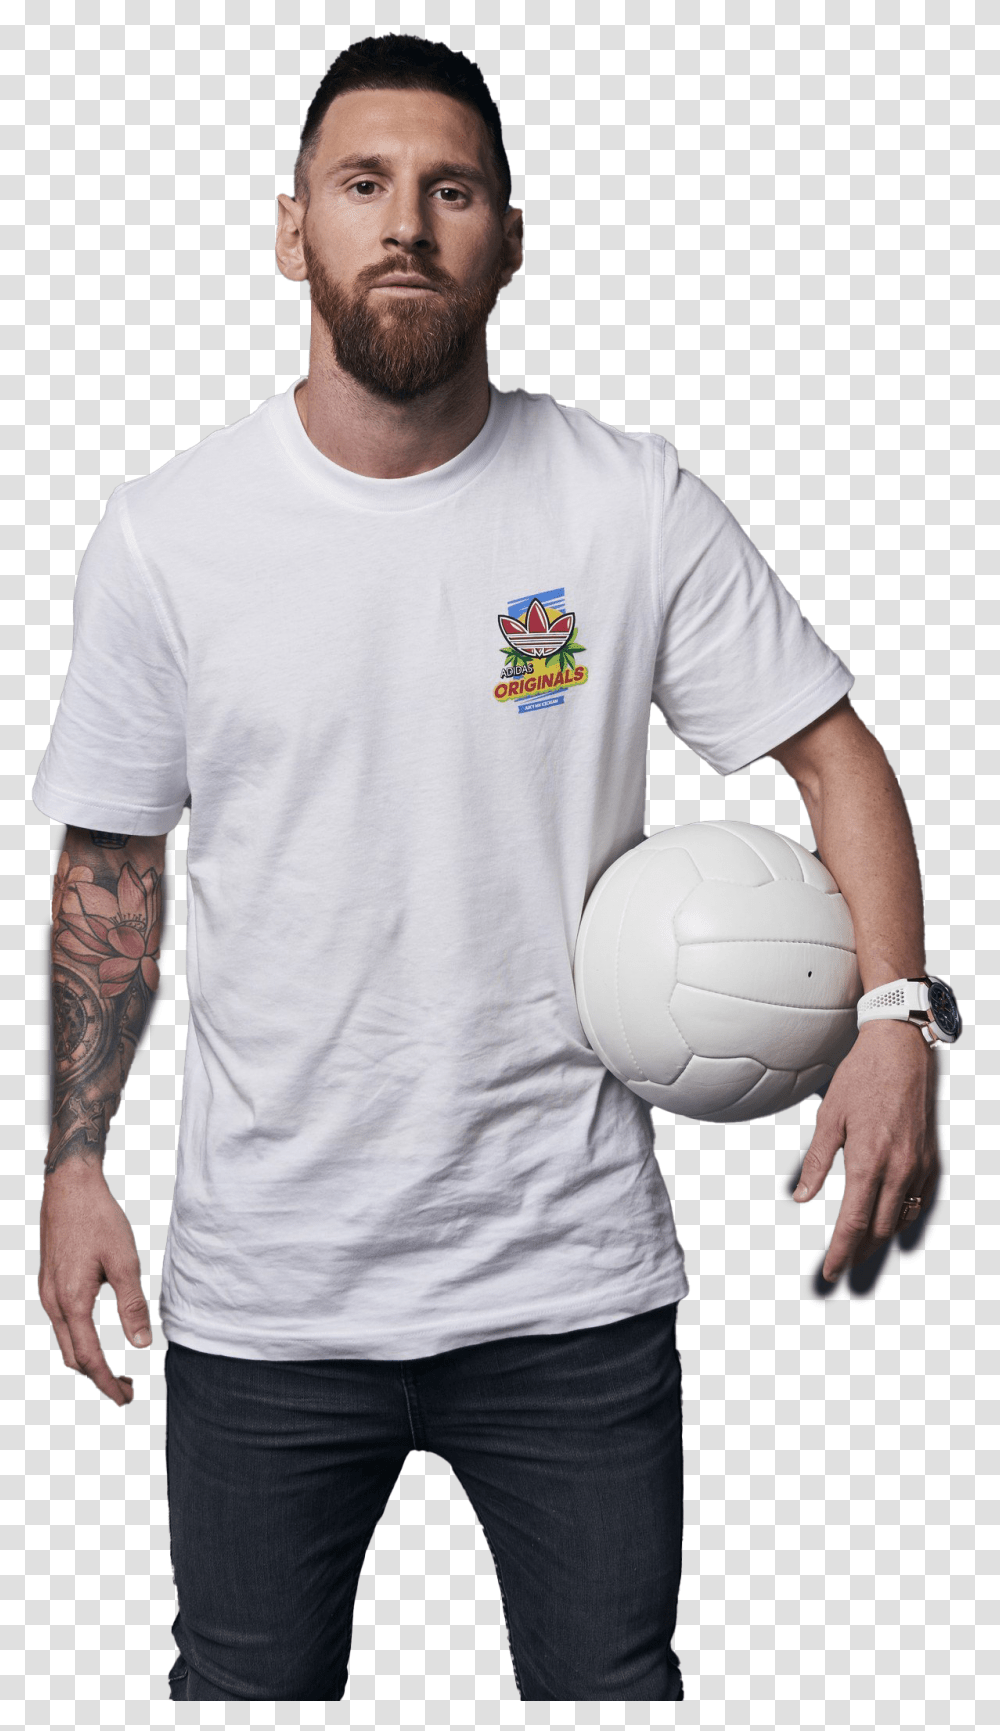 Lionel Messi File Player, Apparel, Sleeve, Soccer Ball Transparent Png